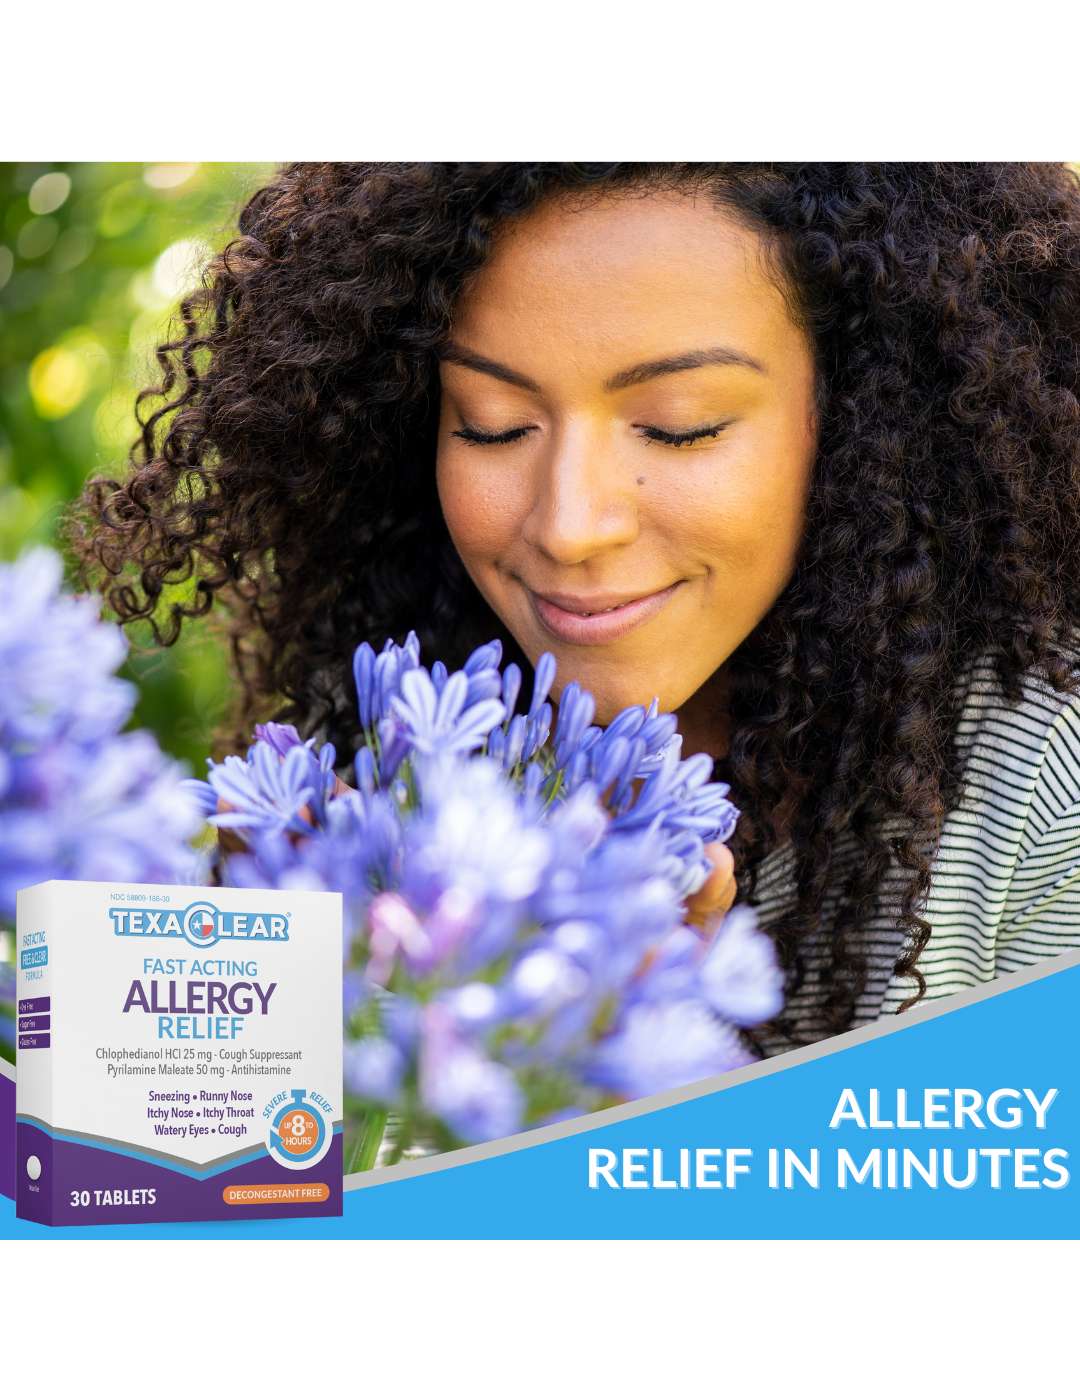 TexaClear Allergy Relief Tablets; image 4 of 6